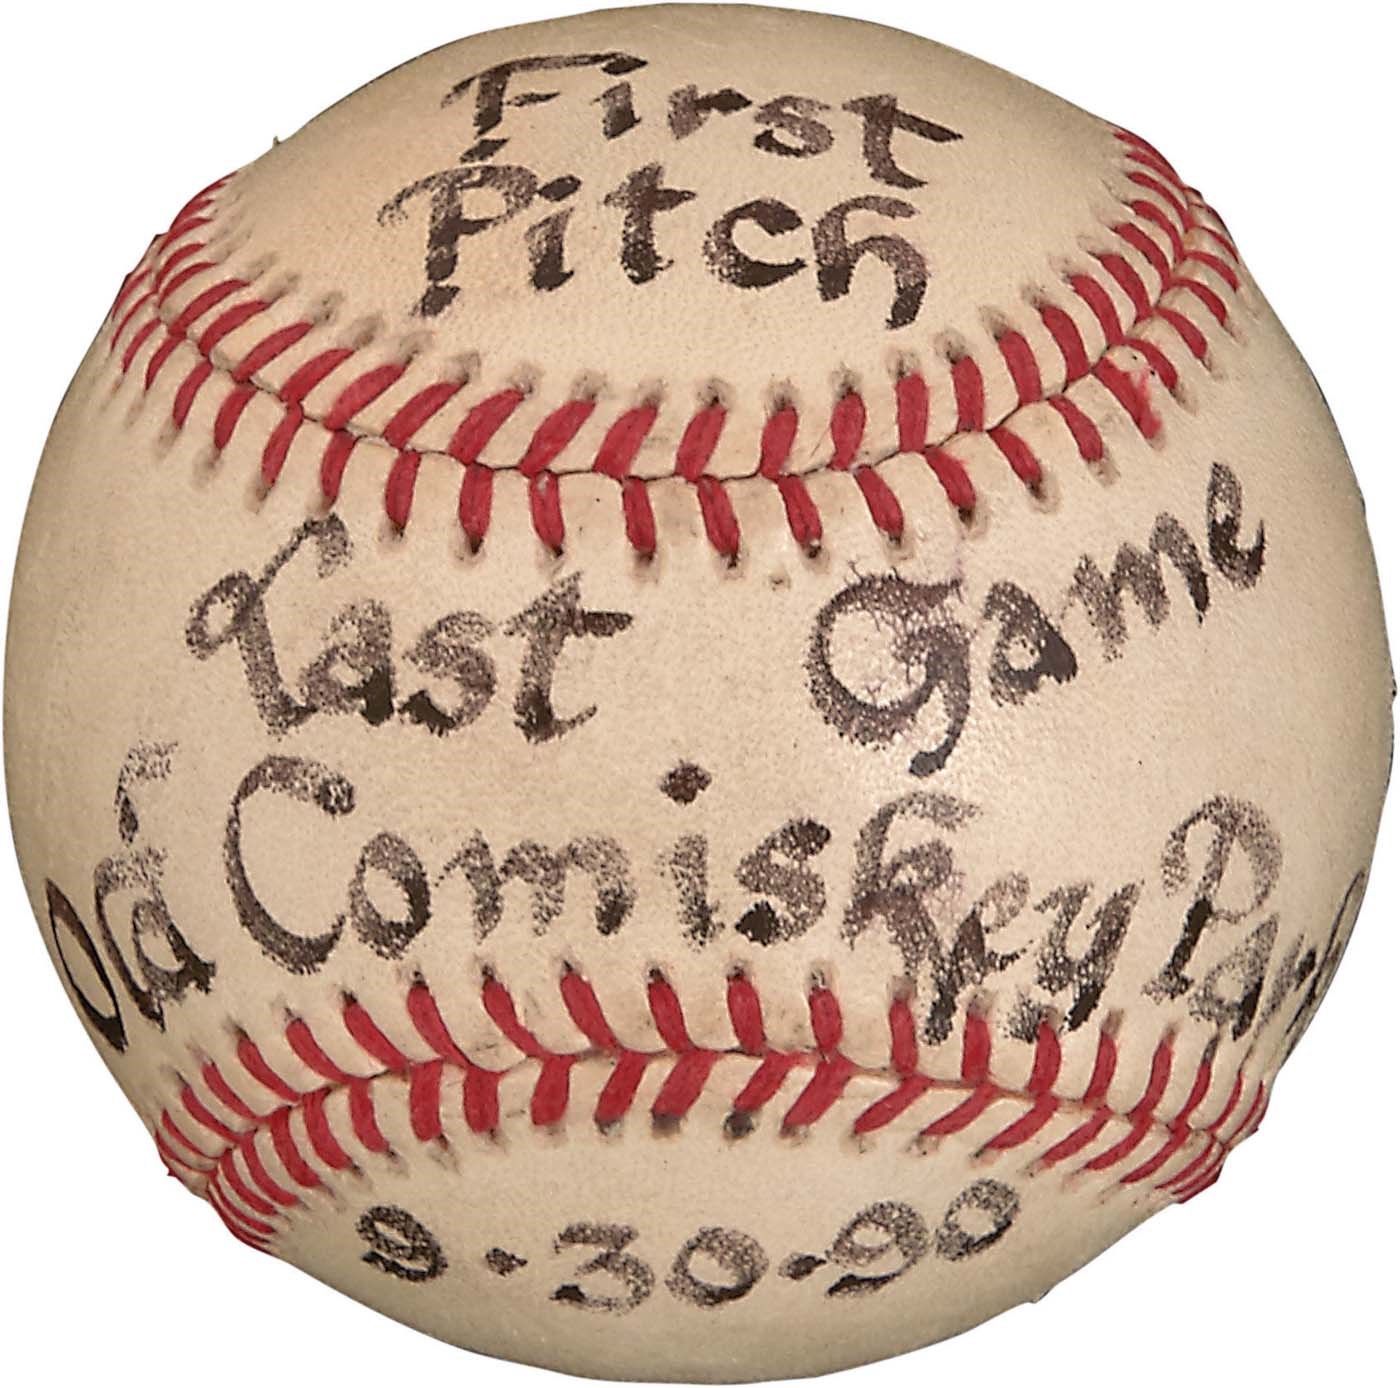 - First Pitch Ball from the Last Game at Old Comiskey Park (Comiskey Family Sourced)